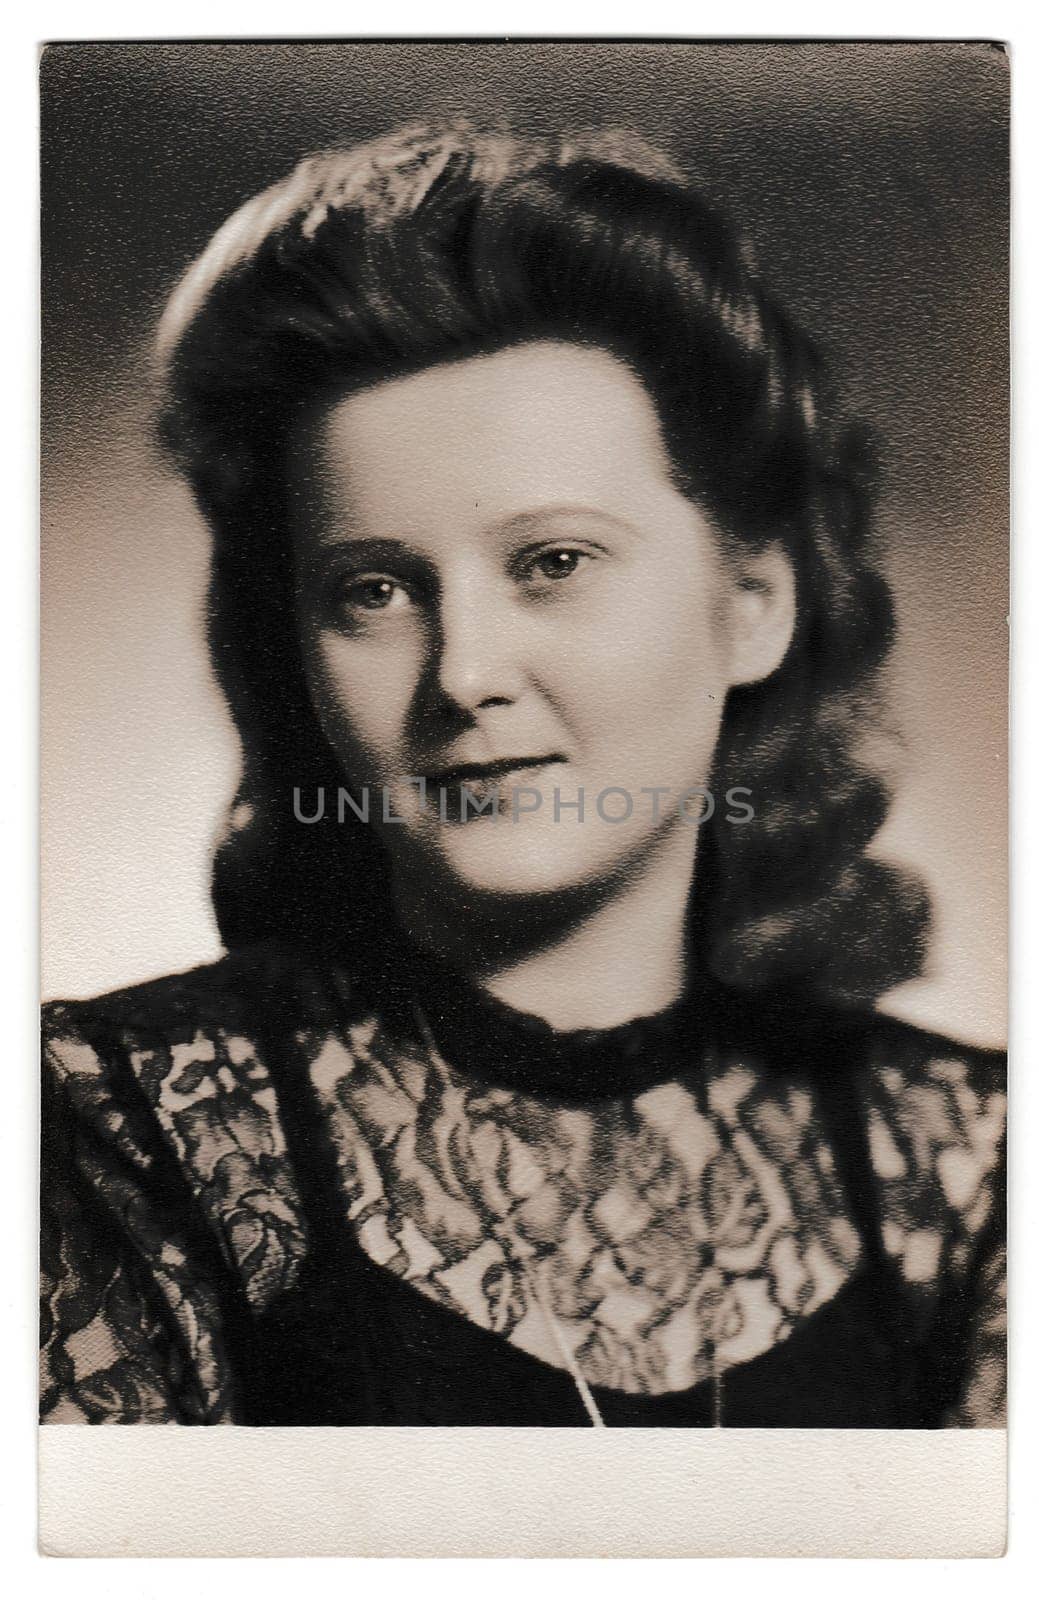 Retro photo shows portrait of young woman. Vintage black and white photography. by roman_nerud